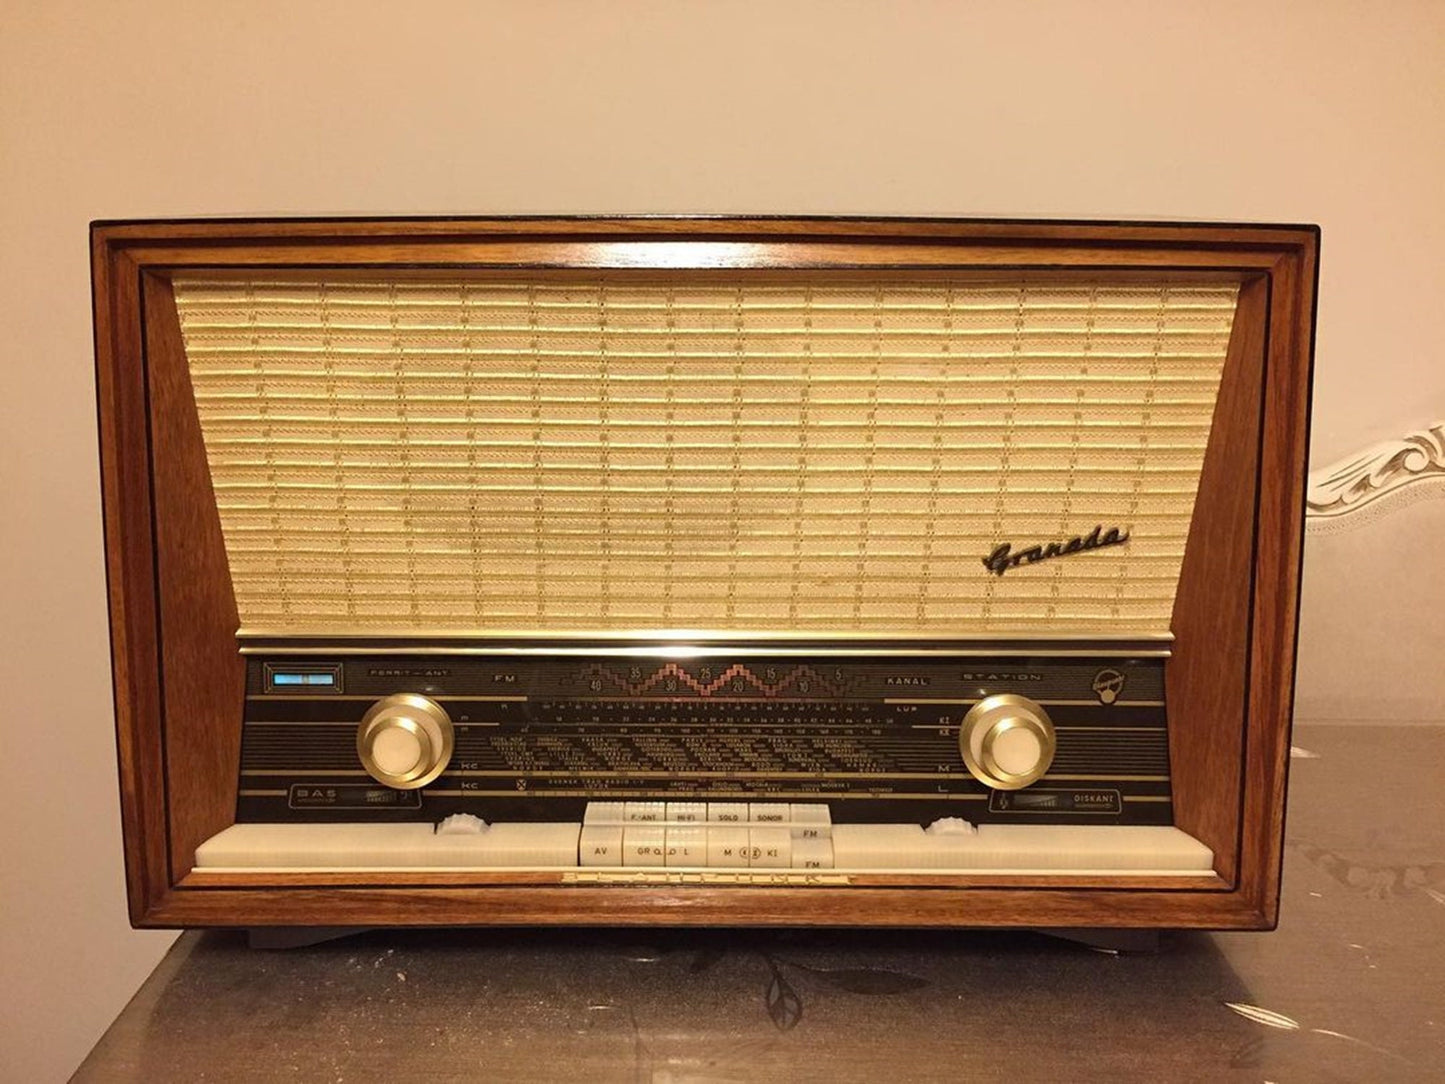 Blaupunkt Granada Radio - A Fusion of Vintage Radiance and Modern Appeal